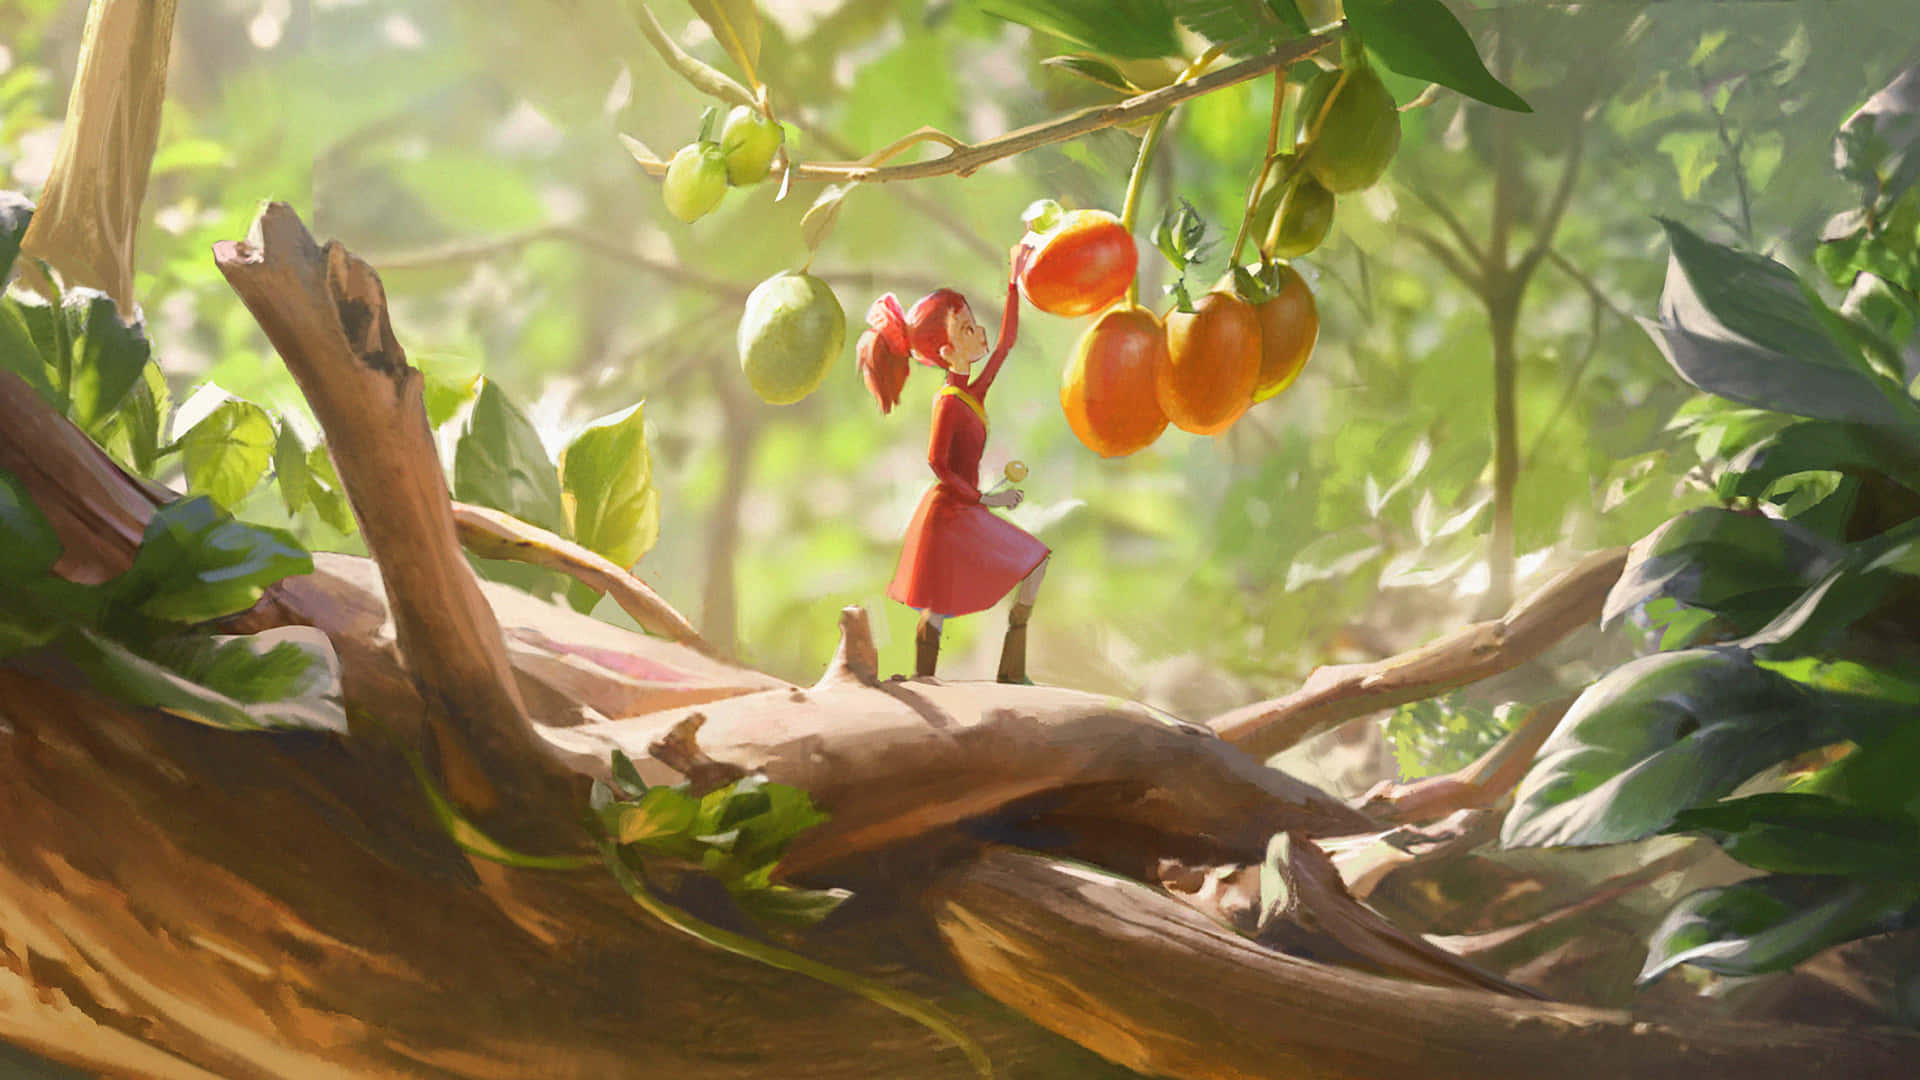 Arrietty and Sho exploring the miniature world together Wallpaper